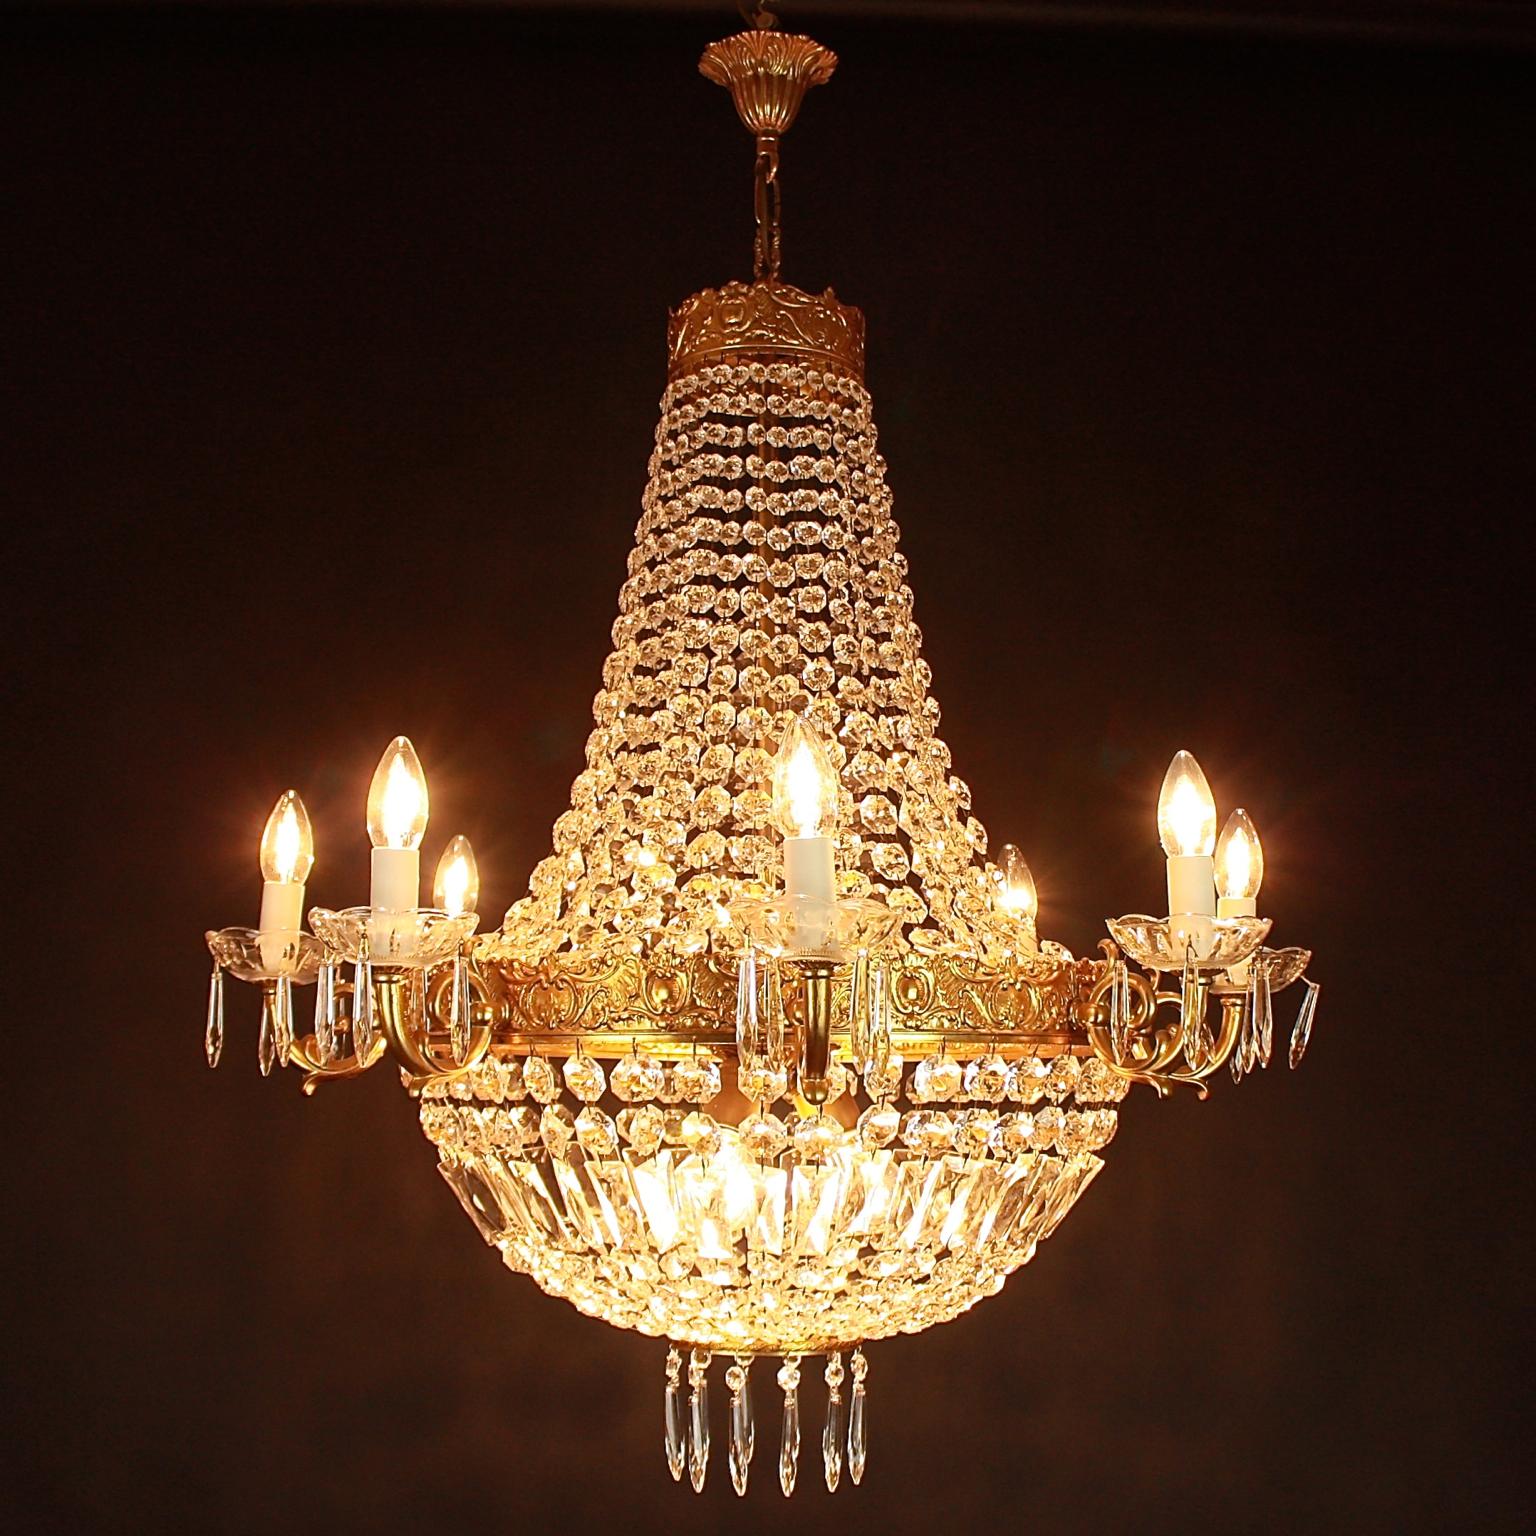 French Pair of Empire Style Basket Chandeliers, Early 20th Century